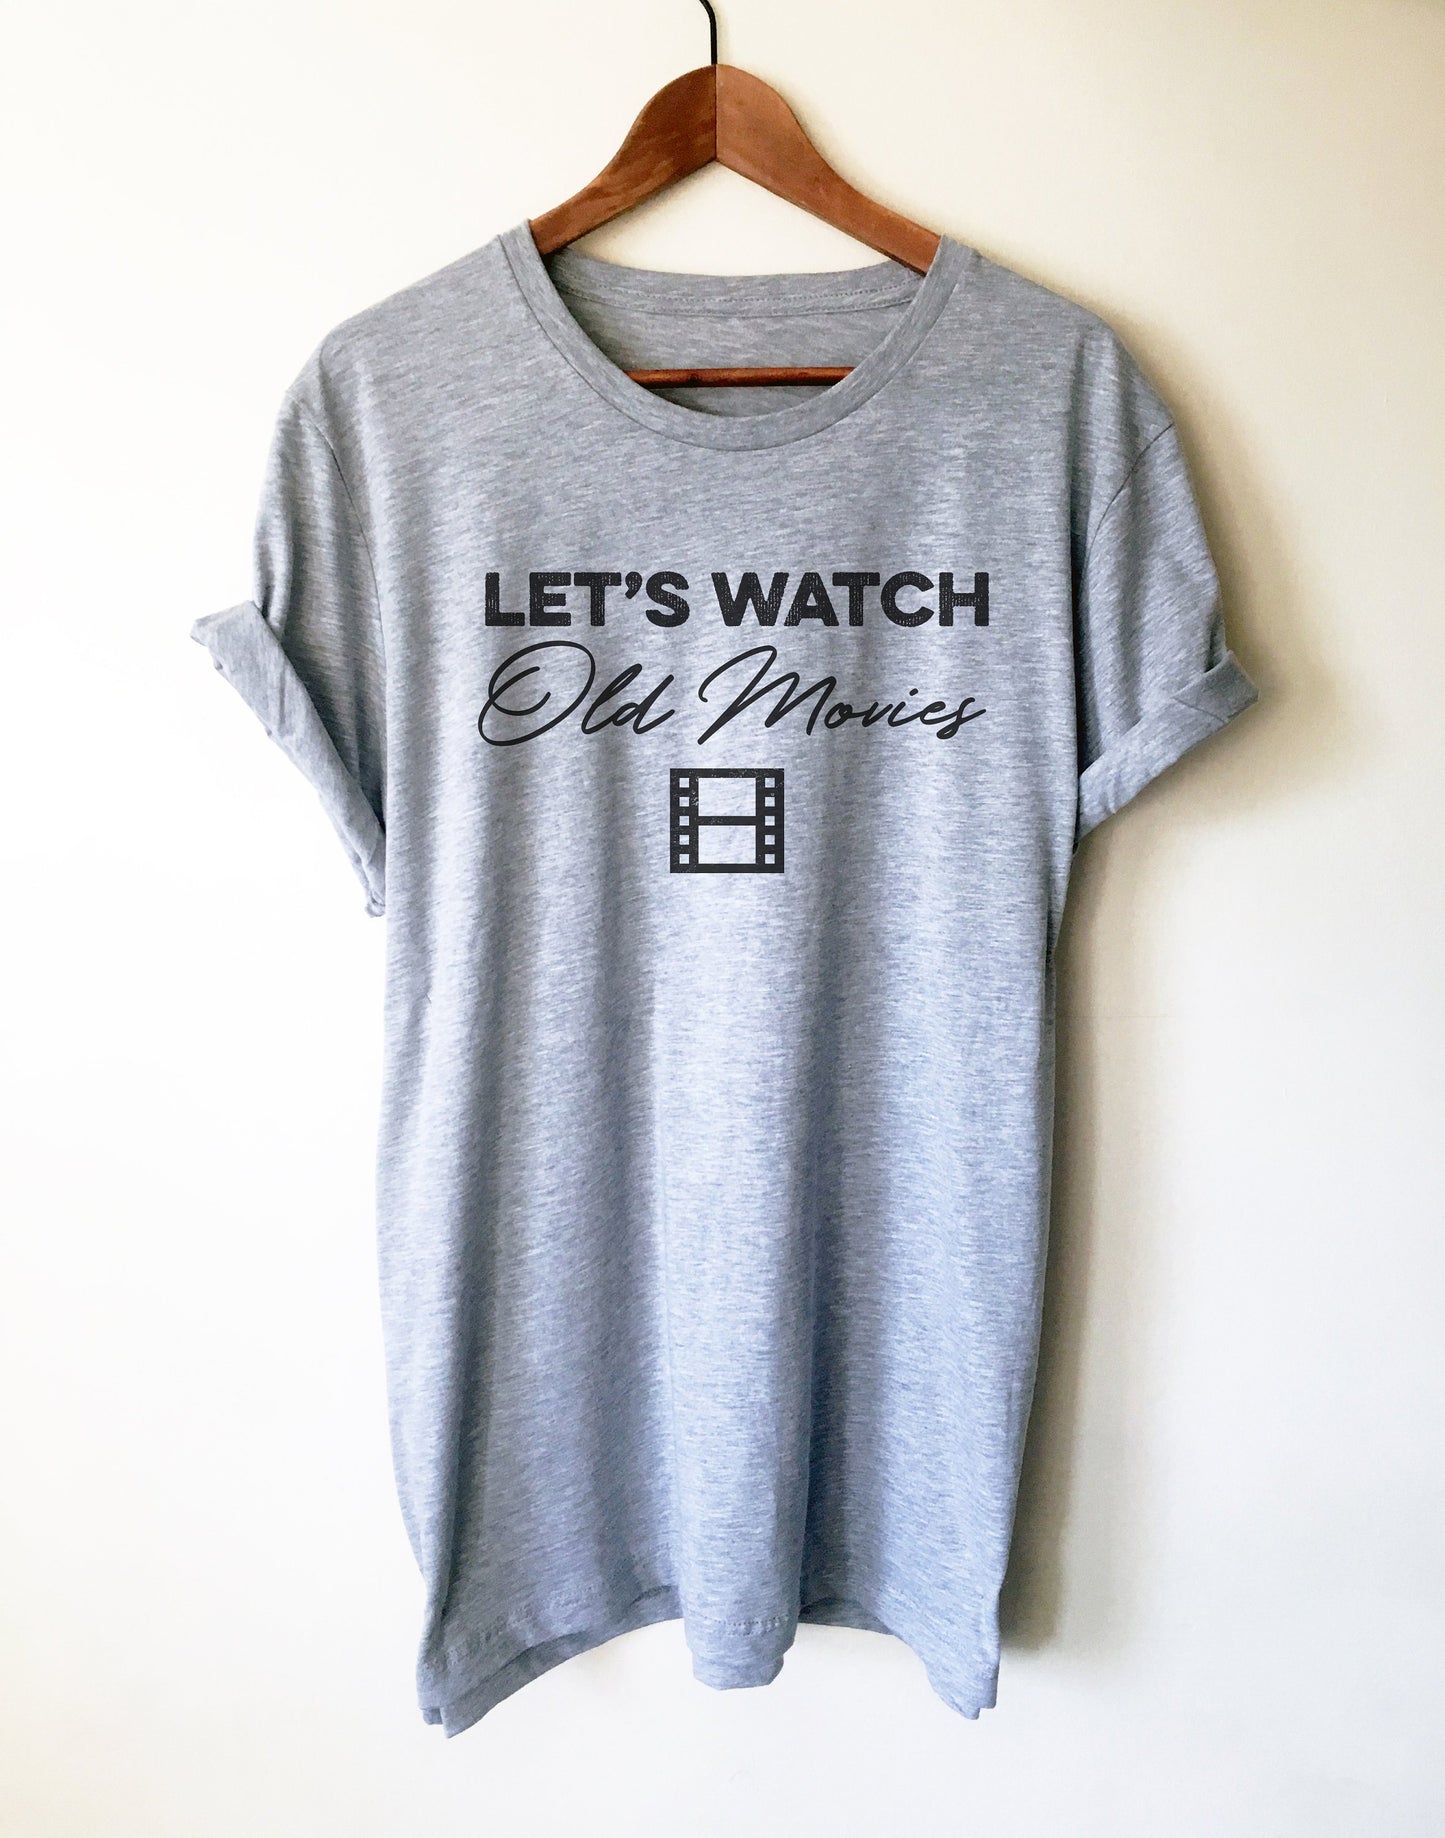 Let's Watch Old Movies Unisex Shirt - Movie Shirt, Movie Lover Gift, Film Gifts, Vintage Film, Cinema Gifts, Director Shirt, Slumber Party